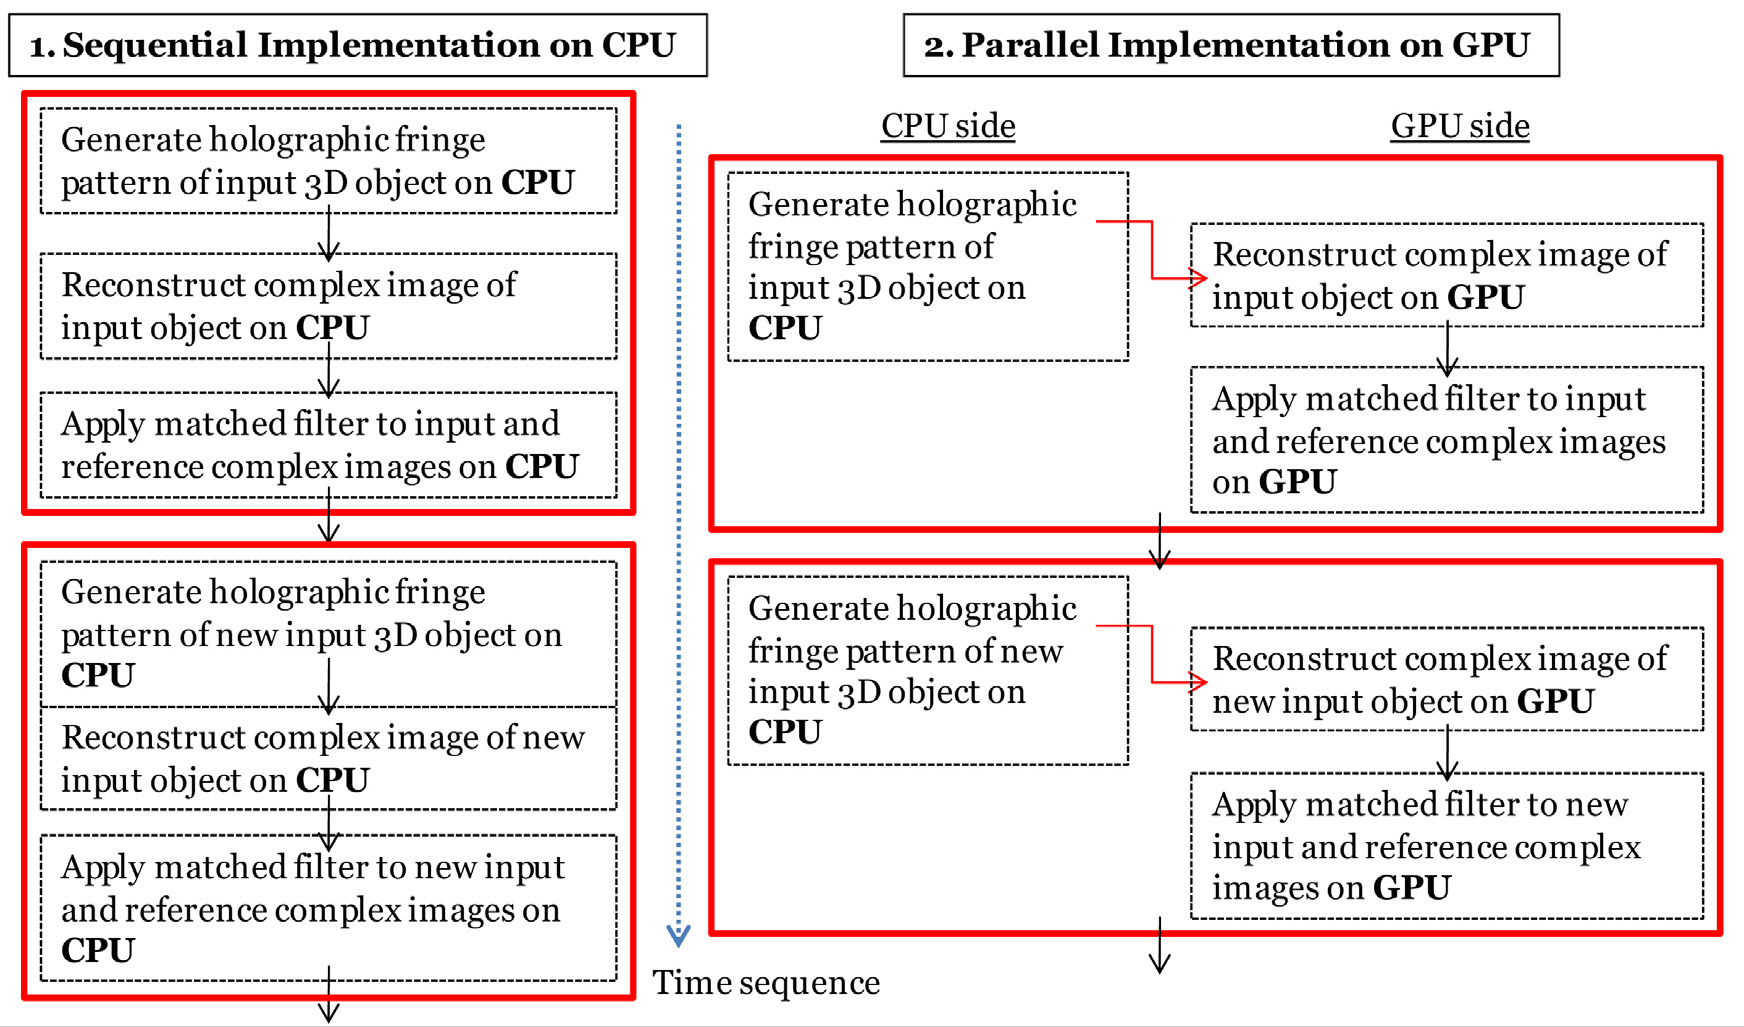 The procedure of parallel implementation on GPU for real-time 3D object recognition.